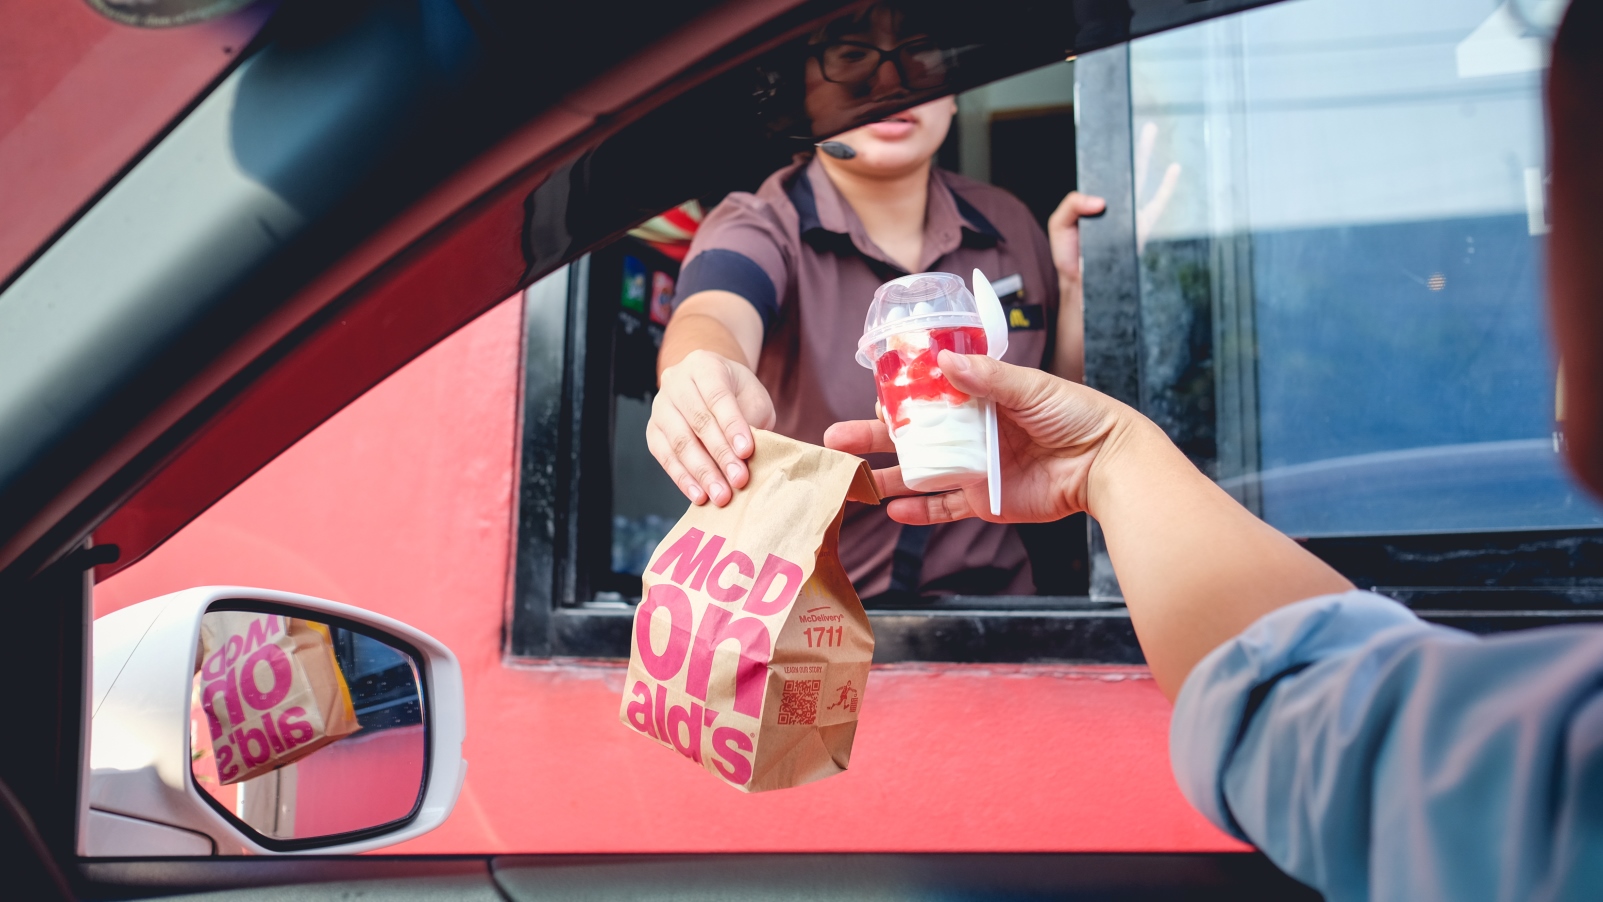 Dynamic Yield's technology will enable McDonald's to offer more personalized service. Photo by Yaoinlove via Shutterstock.com